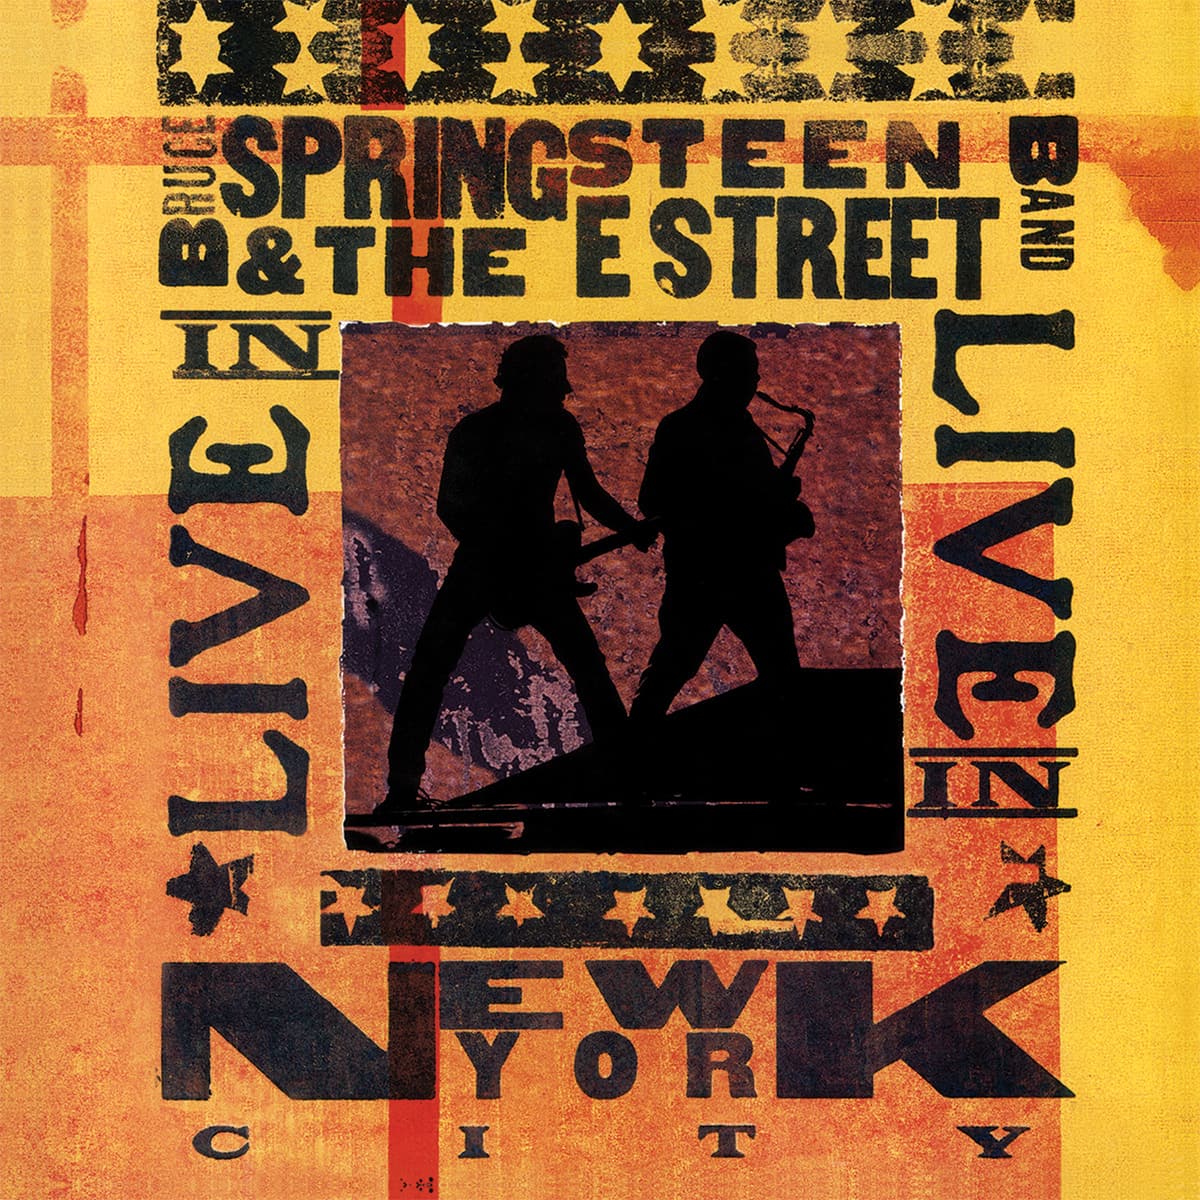 Bruce Springsteen Live in New York City front cover